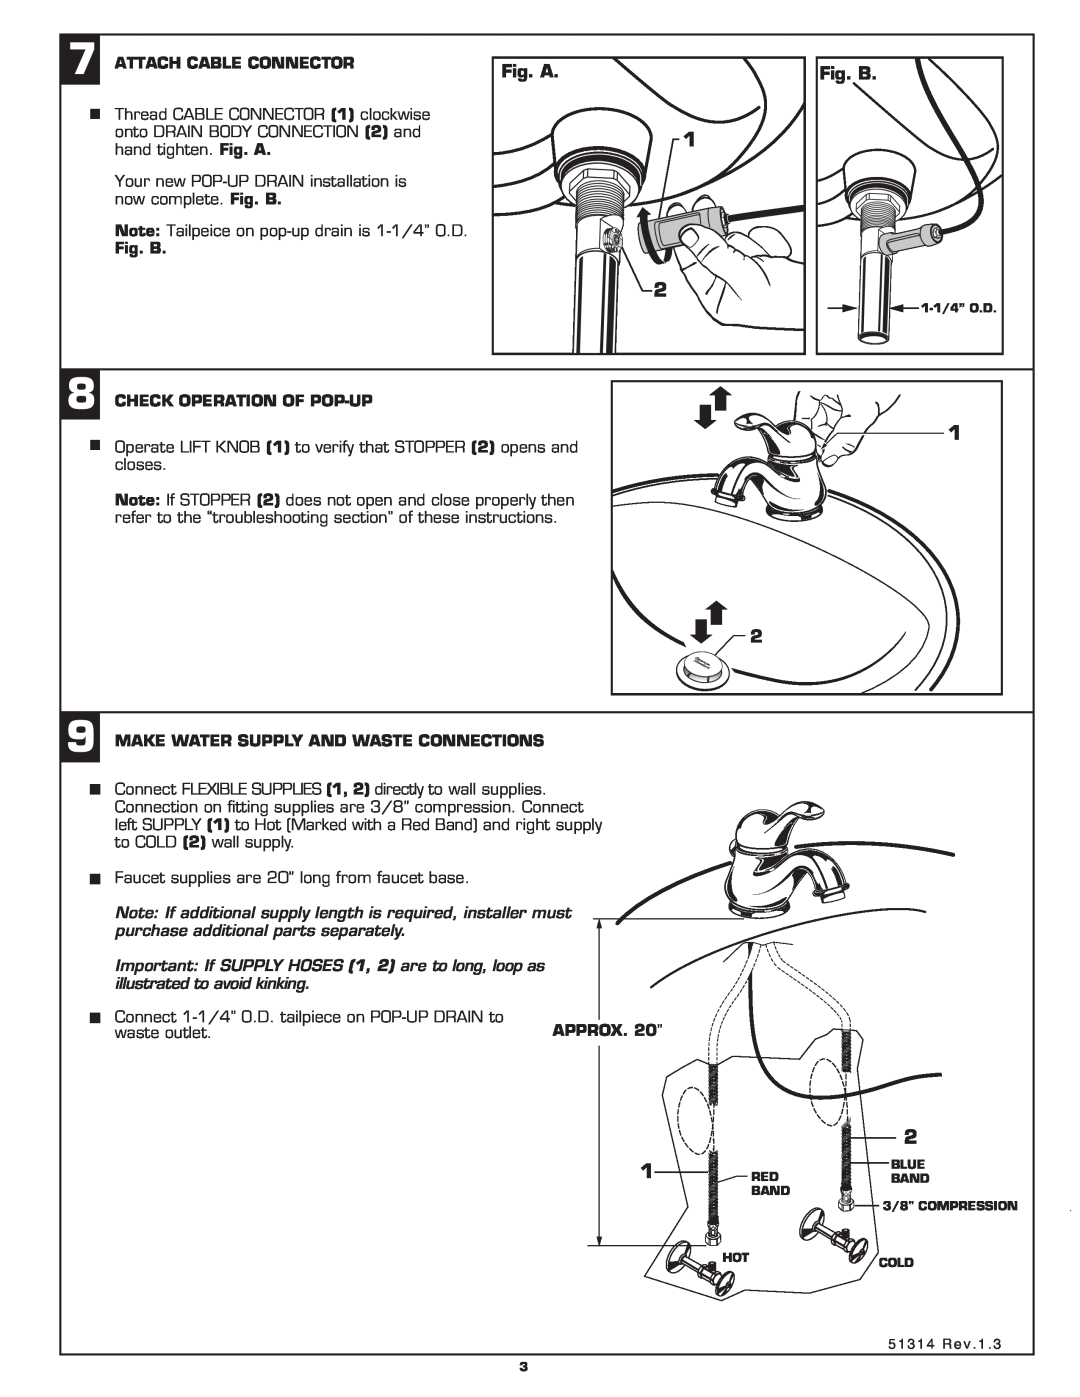 American Standard 3808.101 installation instructions Attach Cable Connector, Fig. B, Check Operation Of Pop-Up, Approx 